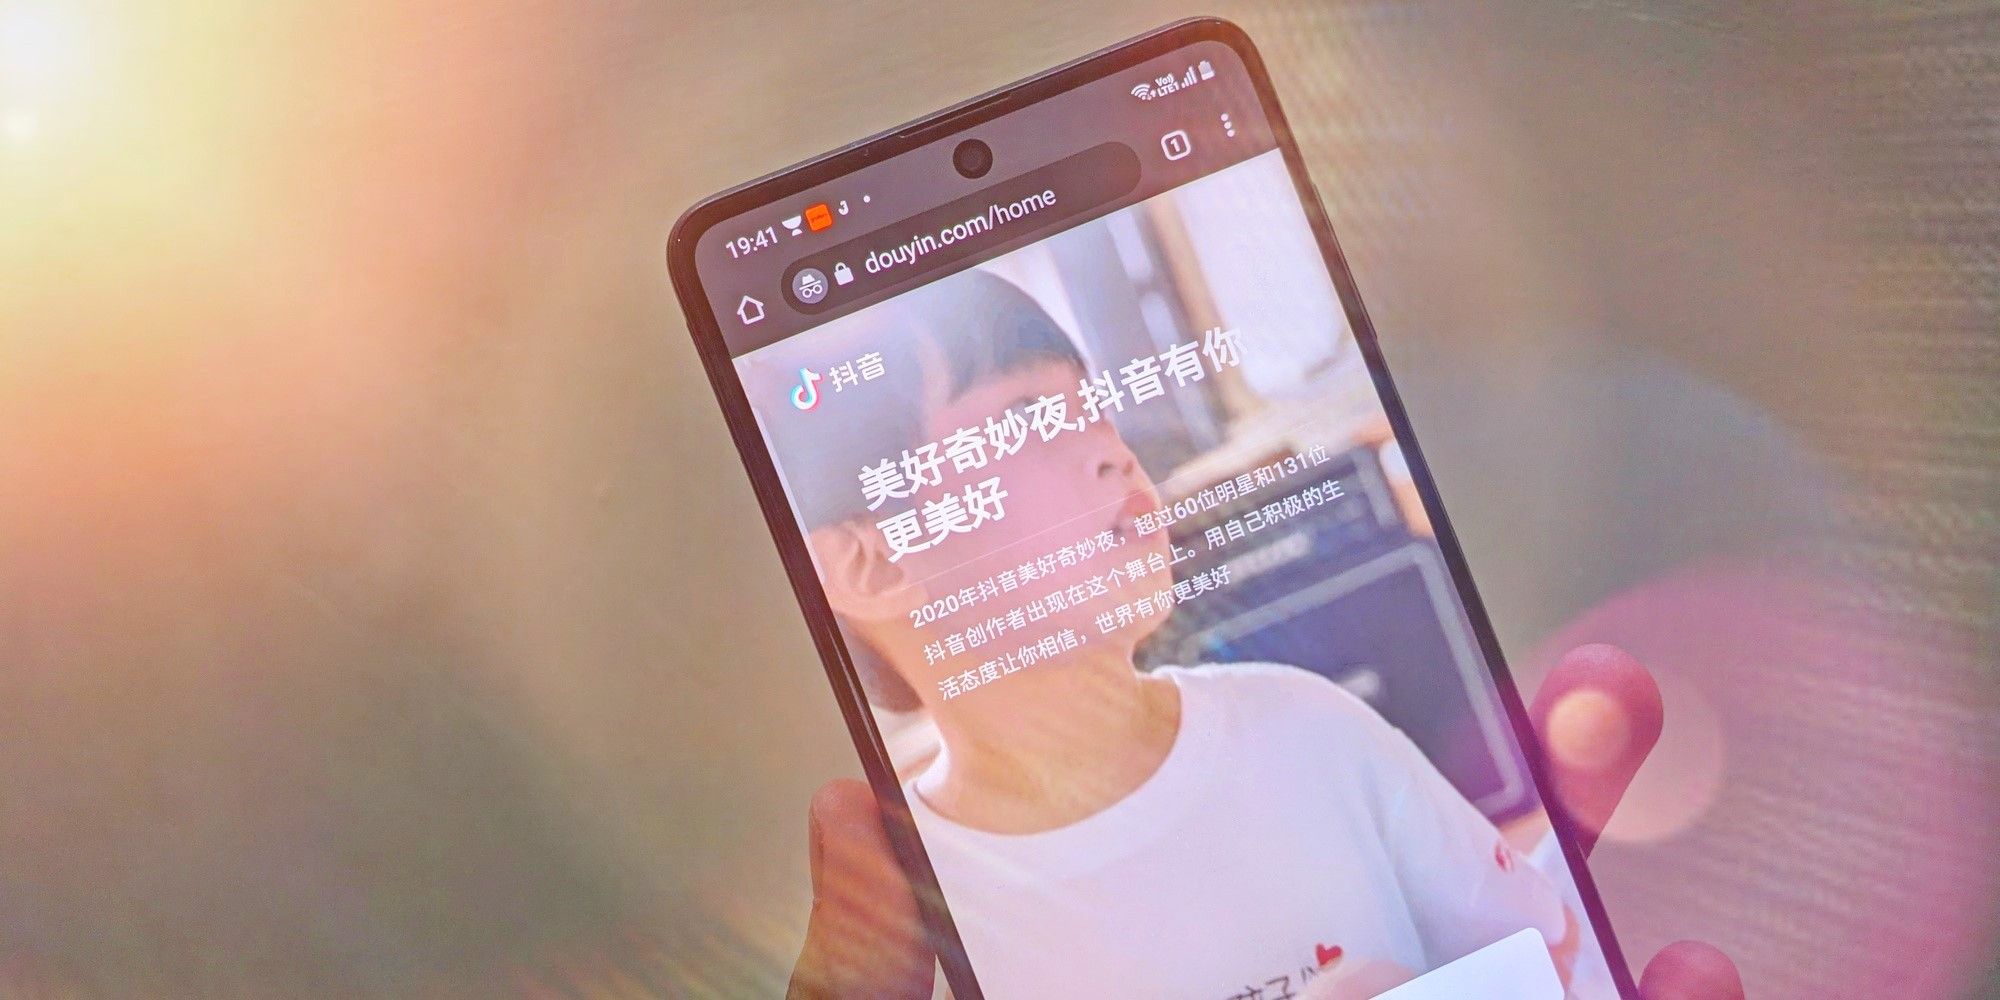 China’s TikTok App Now Limits Kids To 40 Min Per Day, And That’s Smart